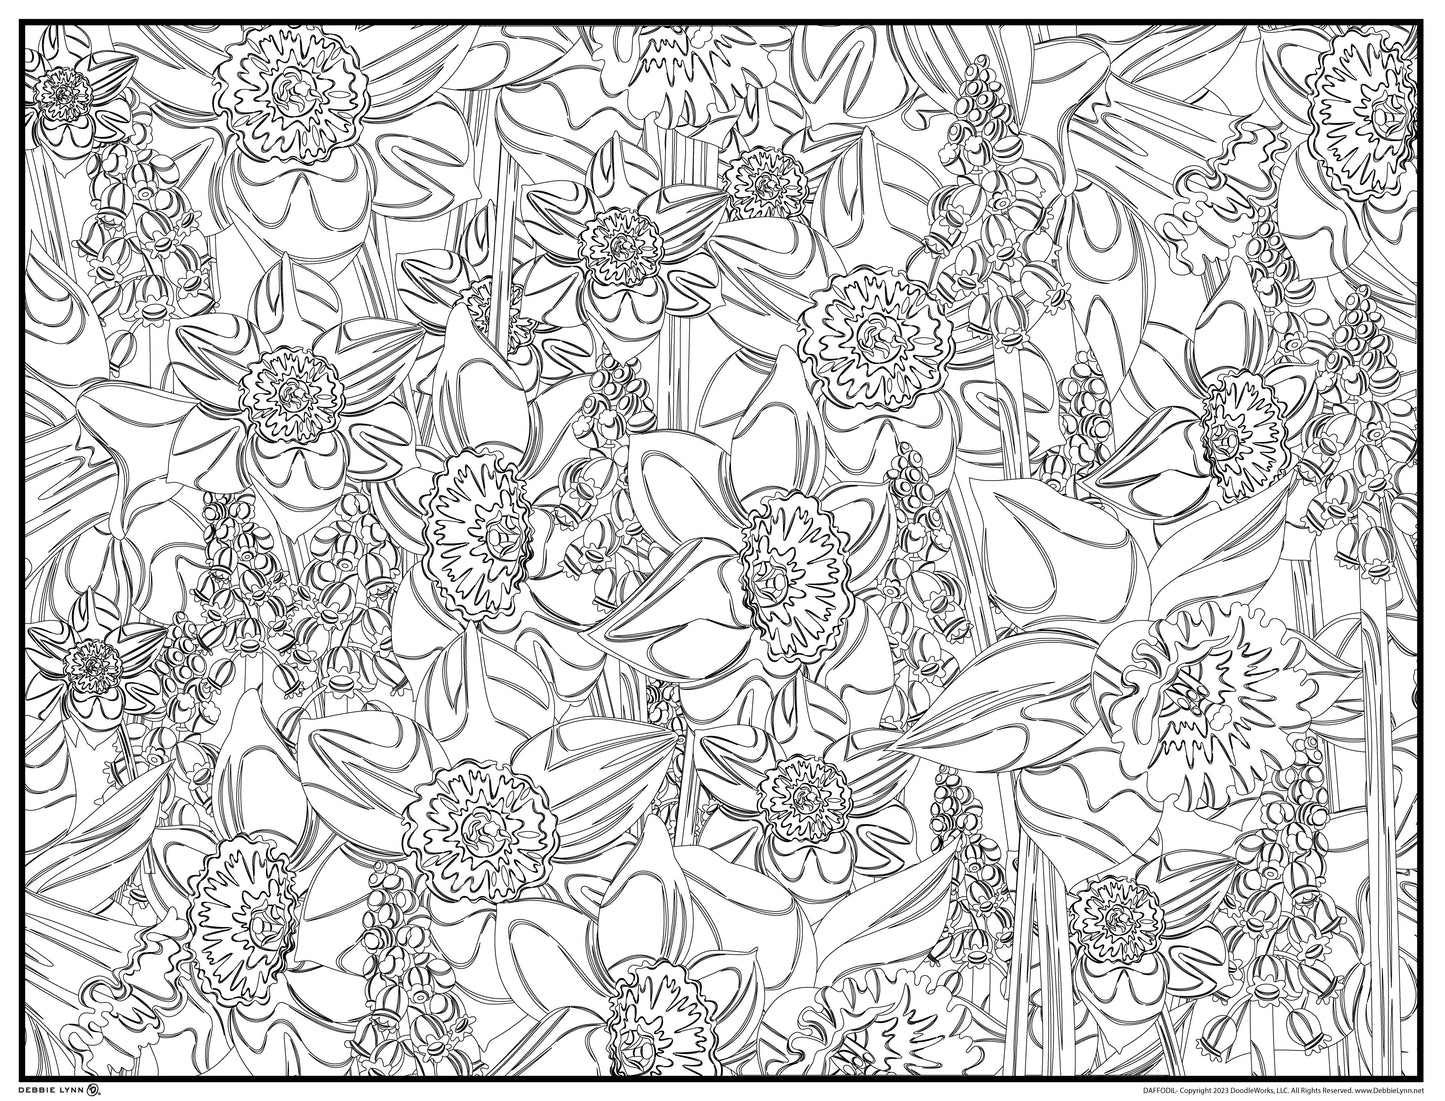 Daffodil  Personalized Giant Coloring Poster 46"x60"